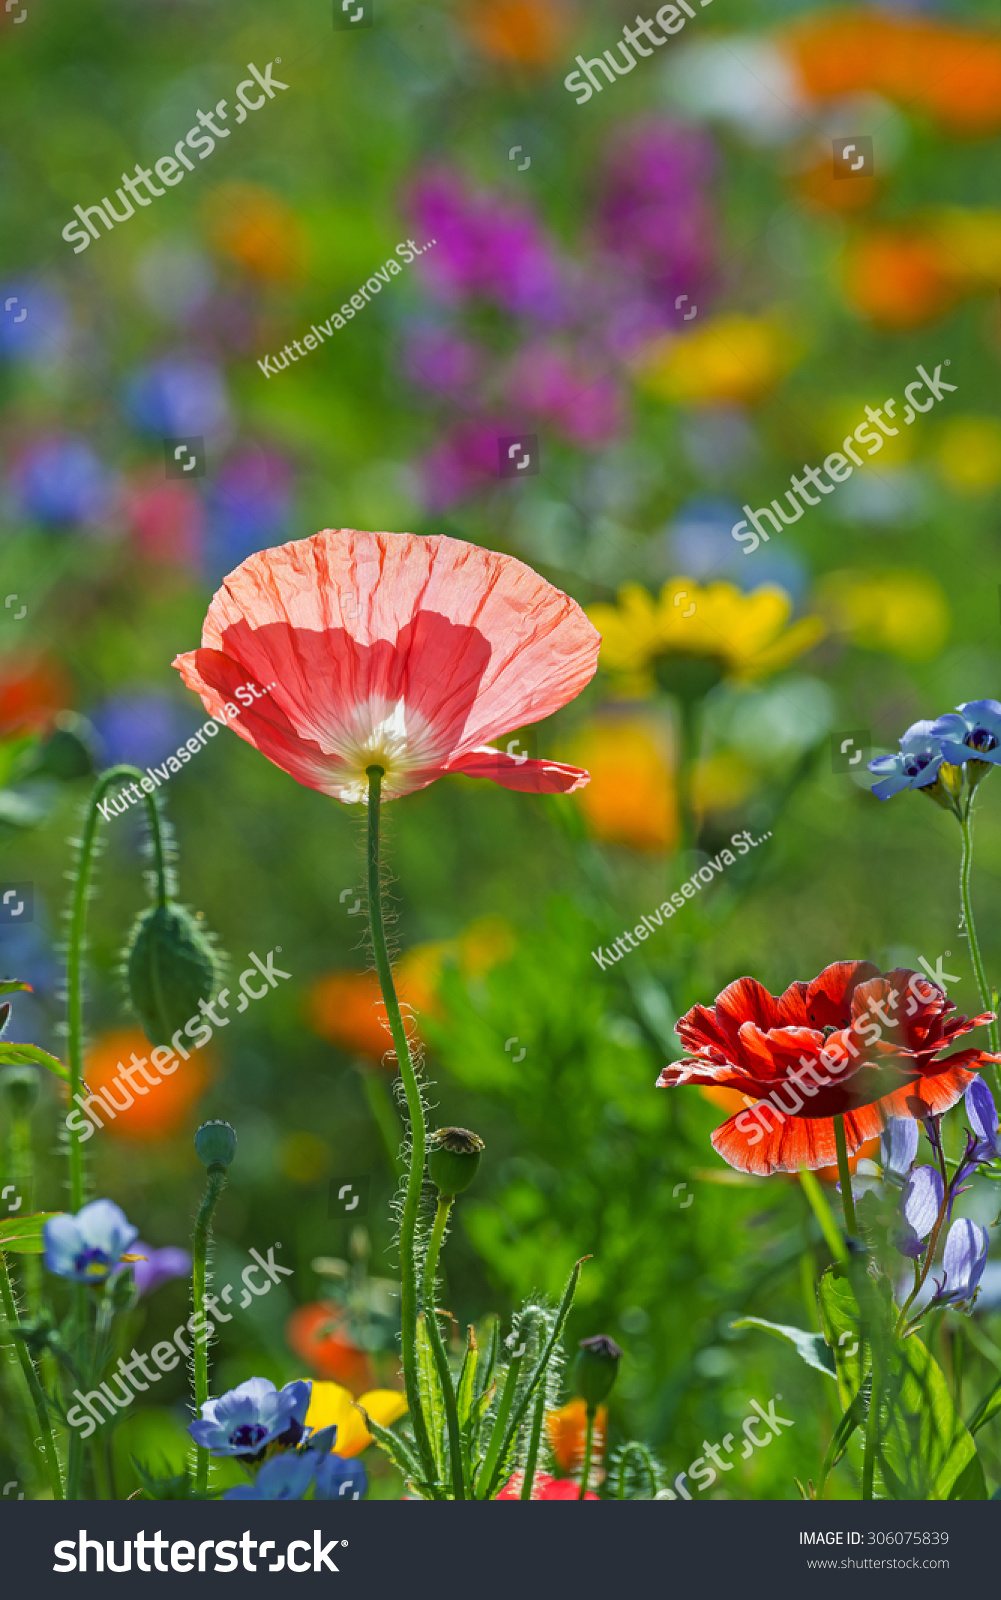 summer meadow with red poppies #306075839